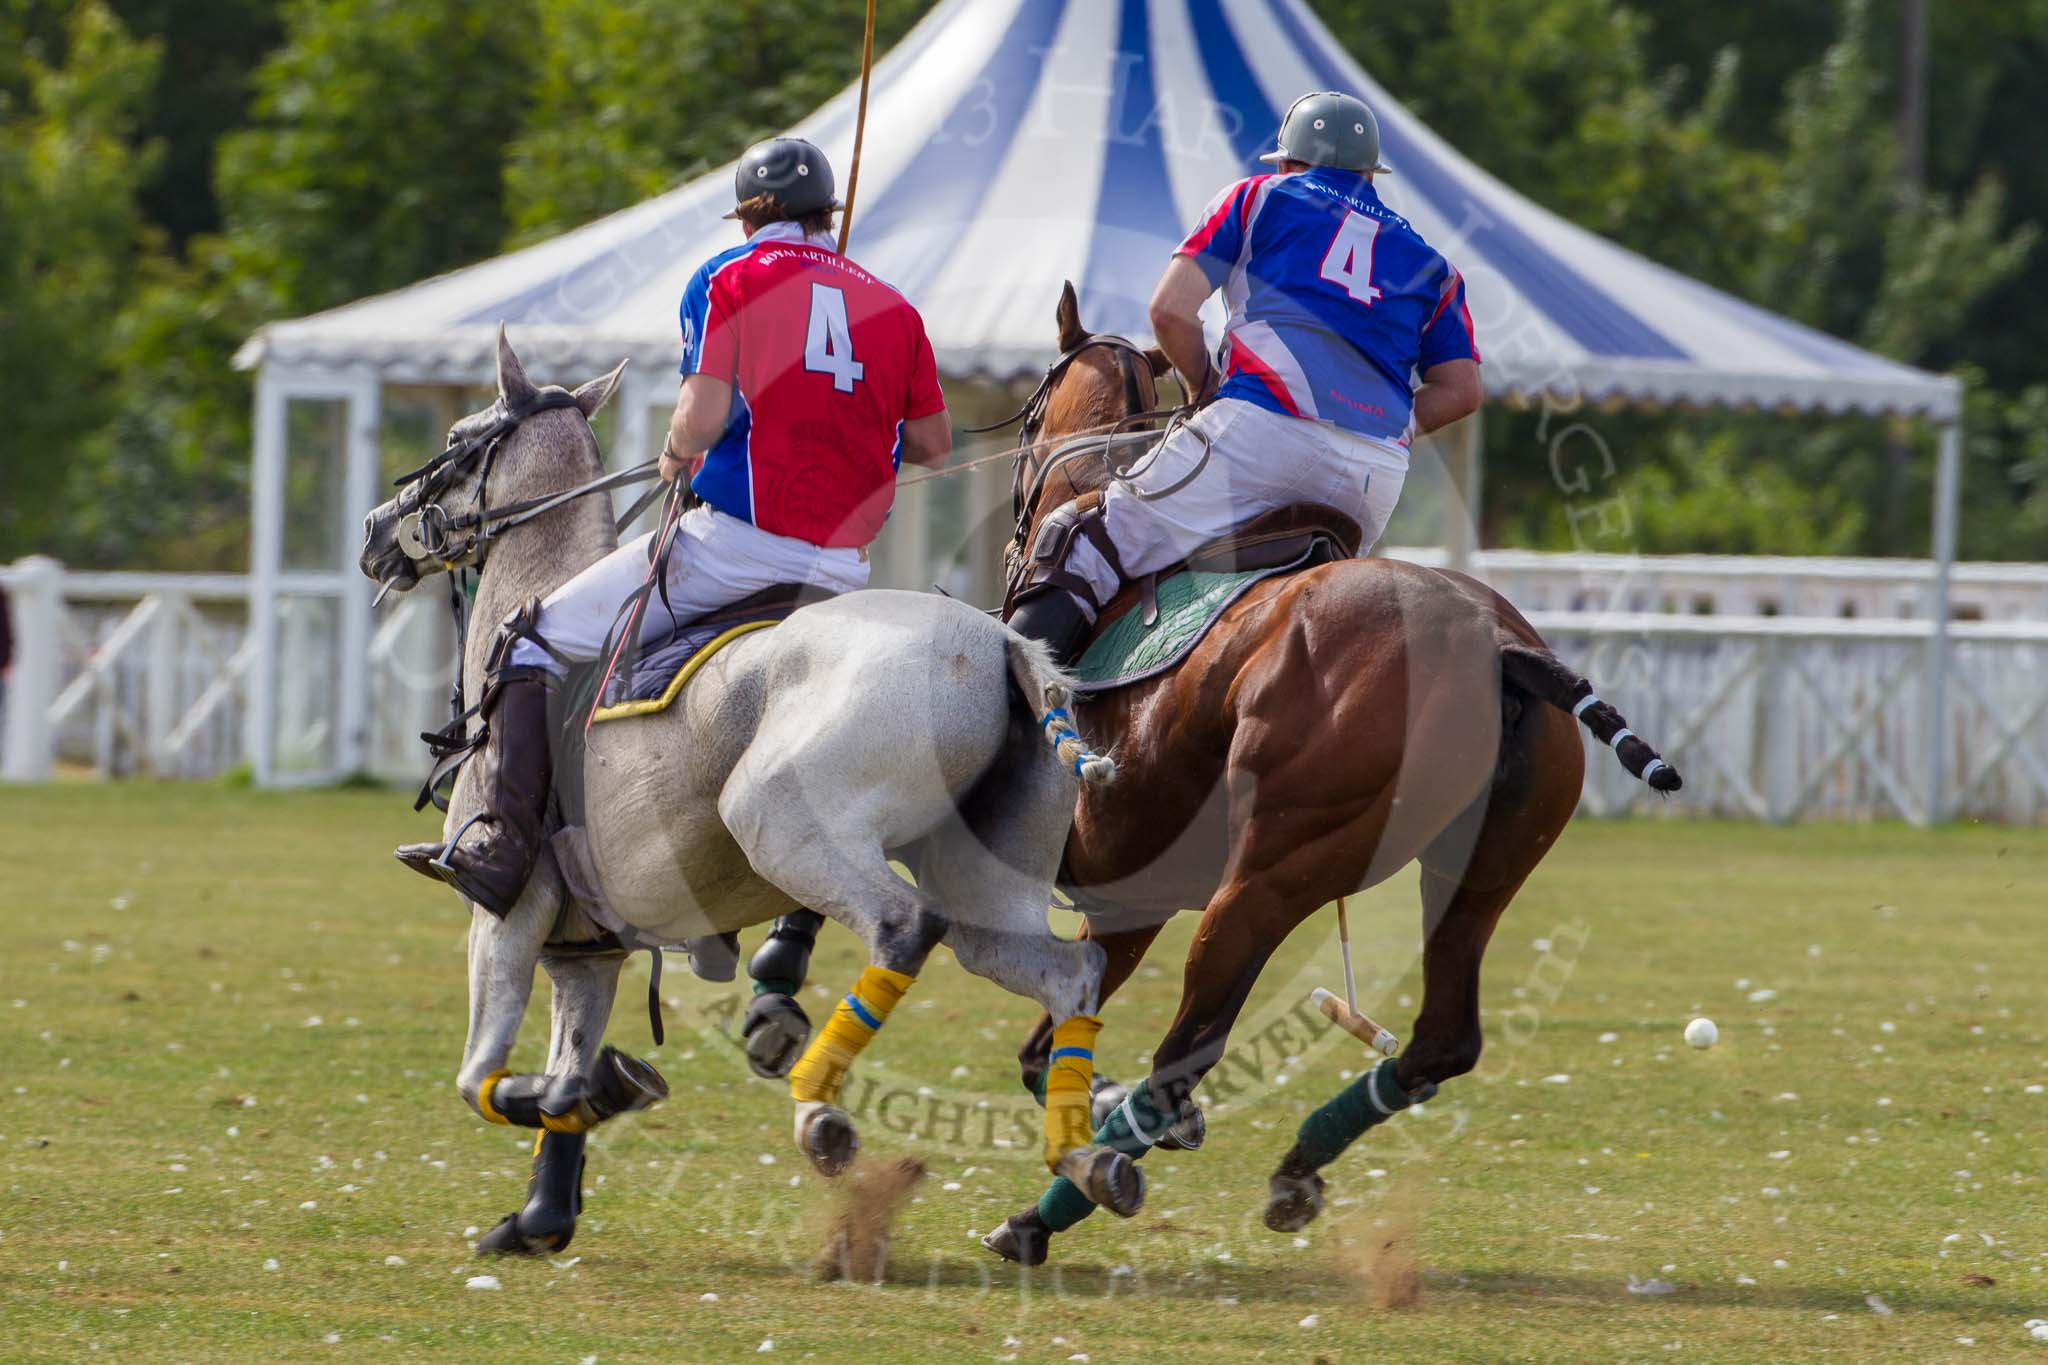 DBPC Polo in the Park 2013.
Dallas Burston Polo Club, ,
Southam,
Warwickshire,
United Kingdom,
on 01 September 2013 at 14:37, image #411